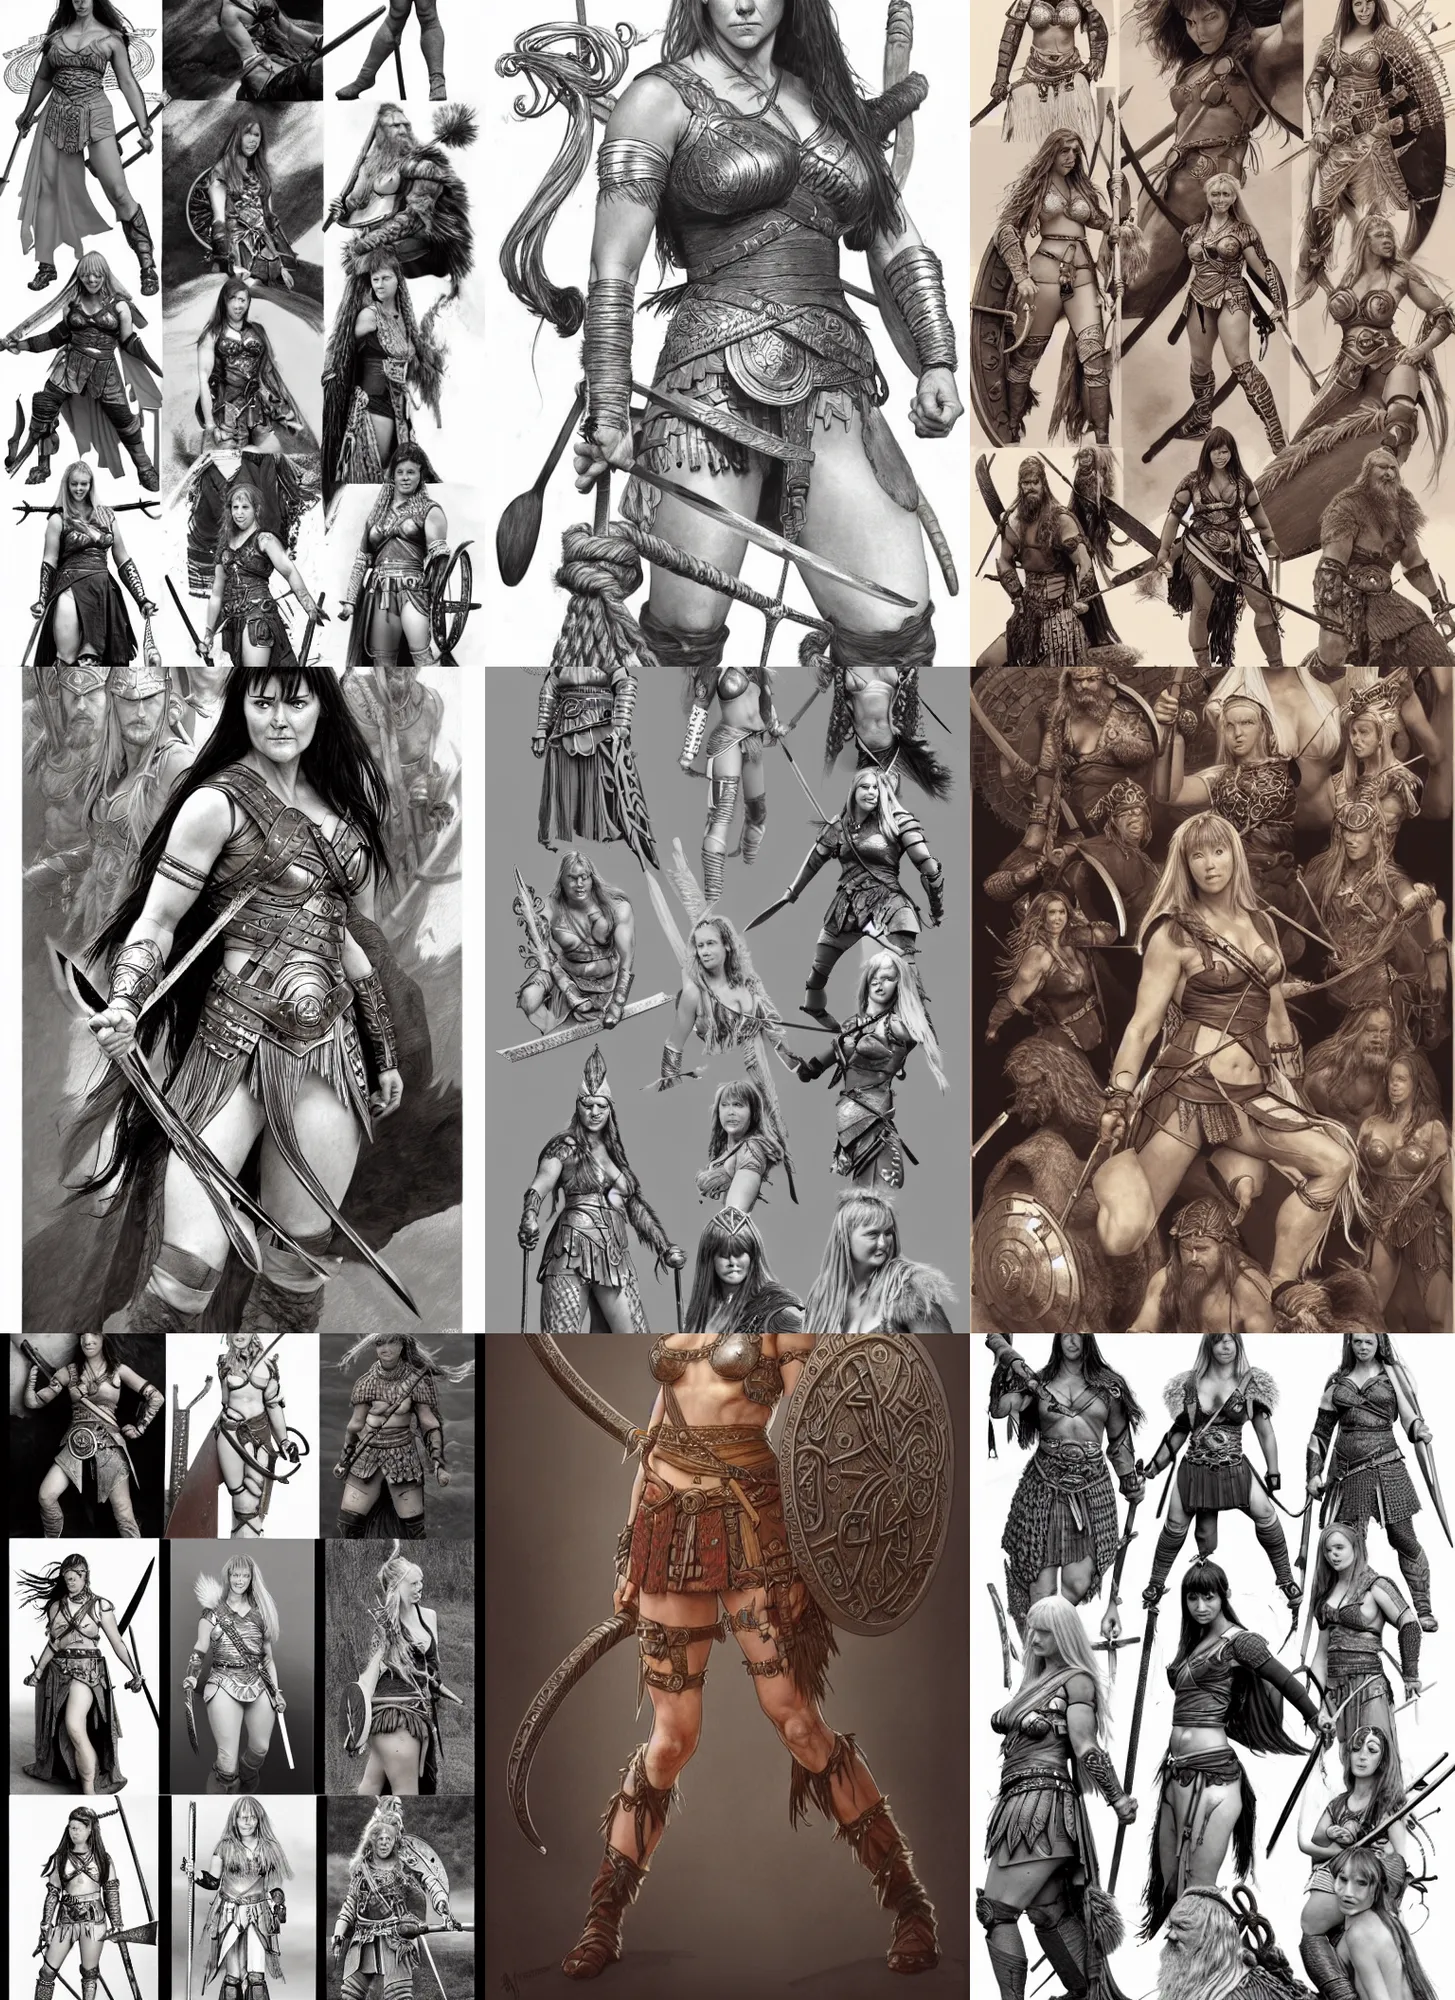 Prompt: detailed pencil spot illustrations of various character concepts from the xena warrior princess and ancient viking culture crossover, various poses, by burne hogarth, by bridgeman, by anthony ryder, by yoshitaka amano, by ruan jia, by conrad roset, by mucha, cgsociety, artstation.